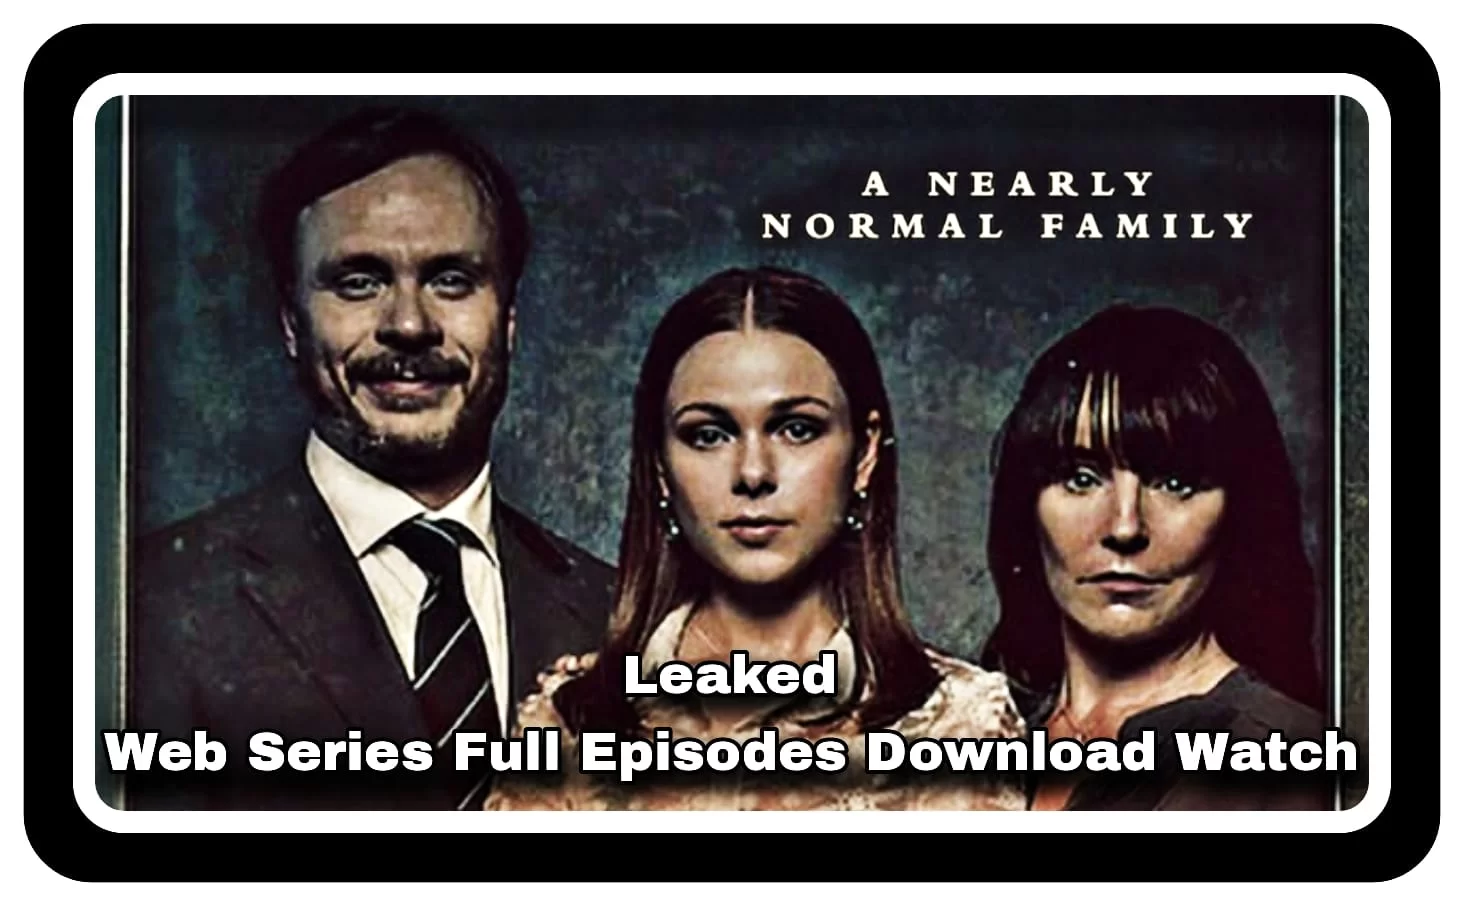 A Nearly Normal Family Web Series Download